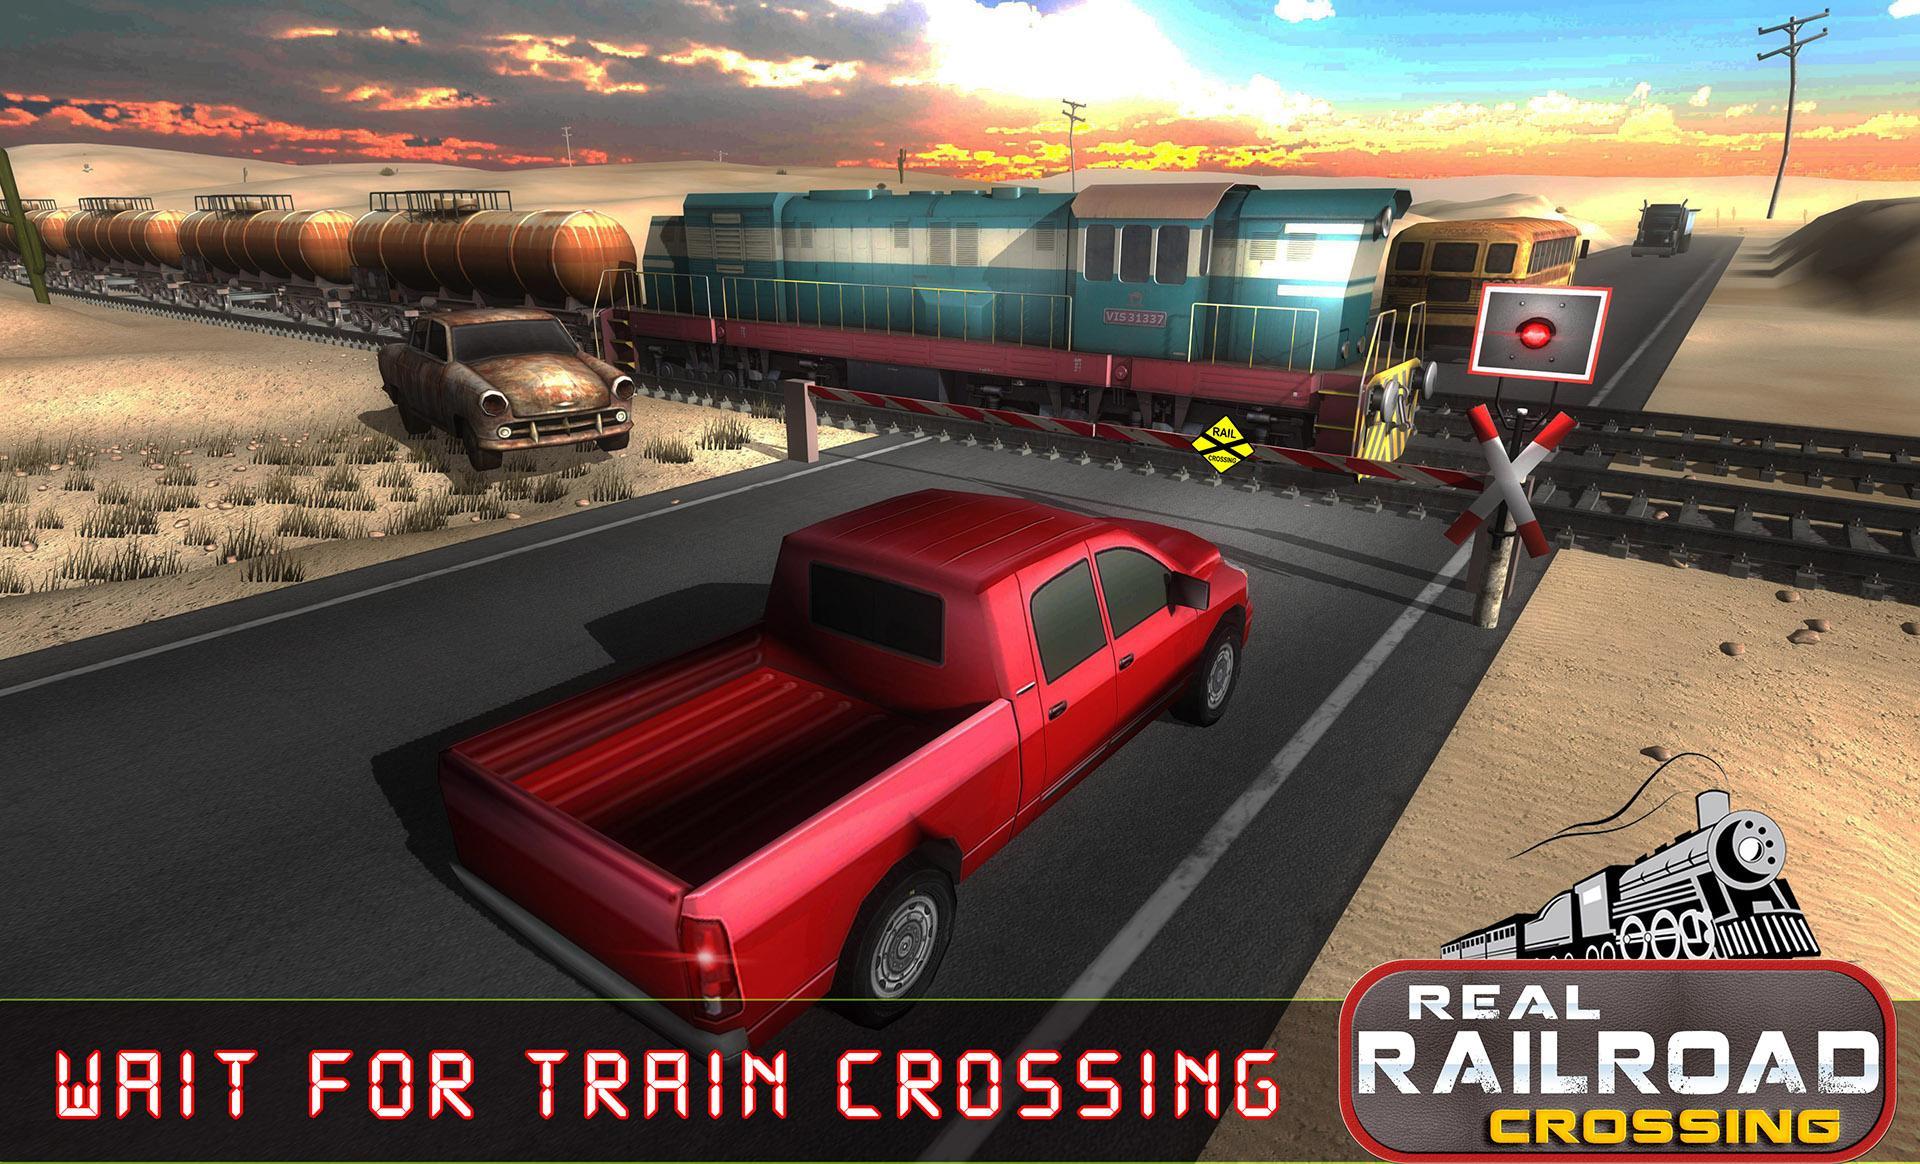 Real Railroad Train Crossing Free Train Games For Android Apk Download - more roblox games with railroad crossings youtube